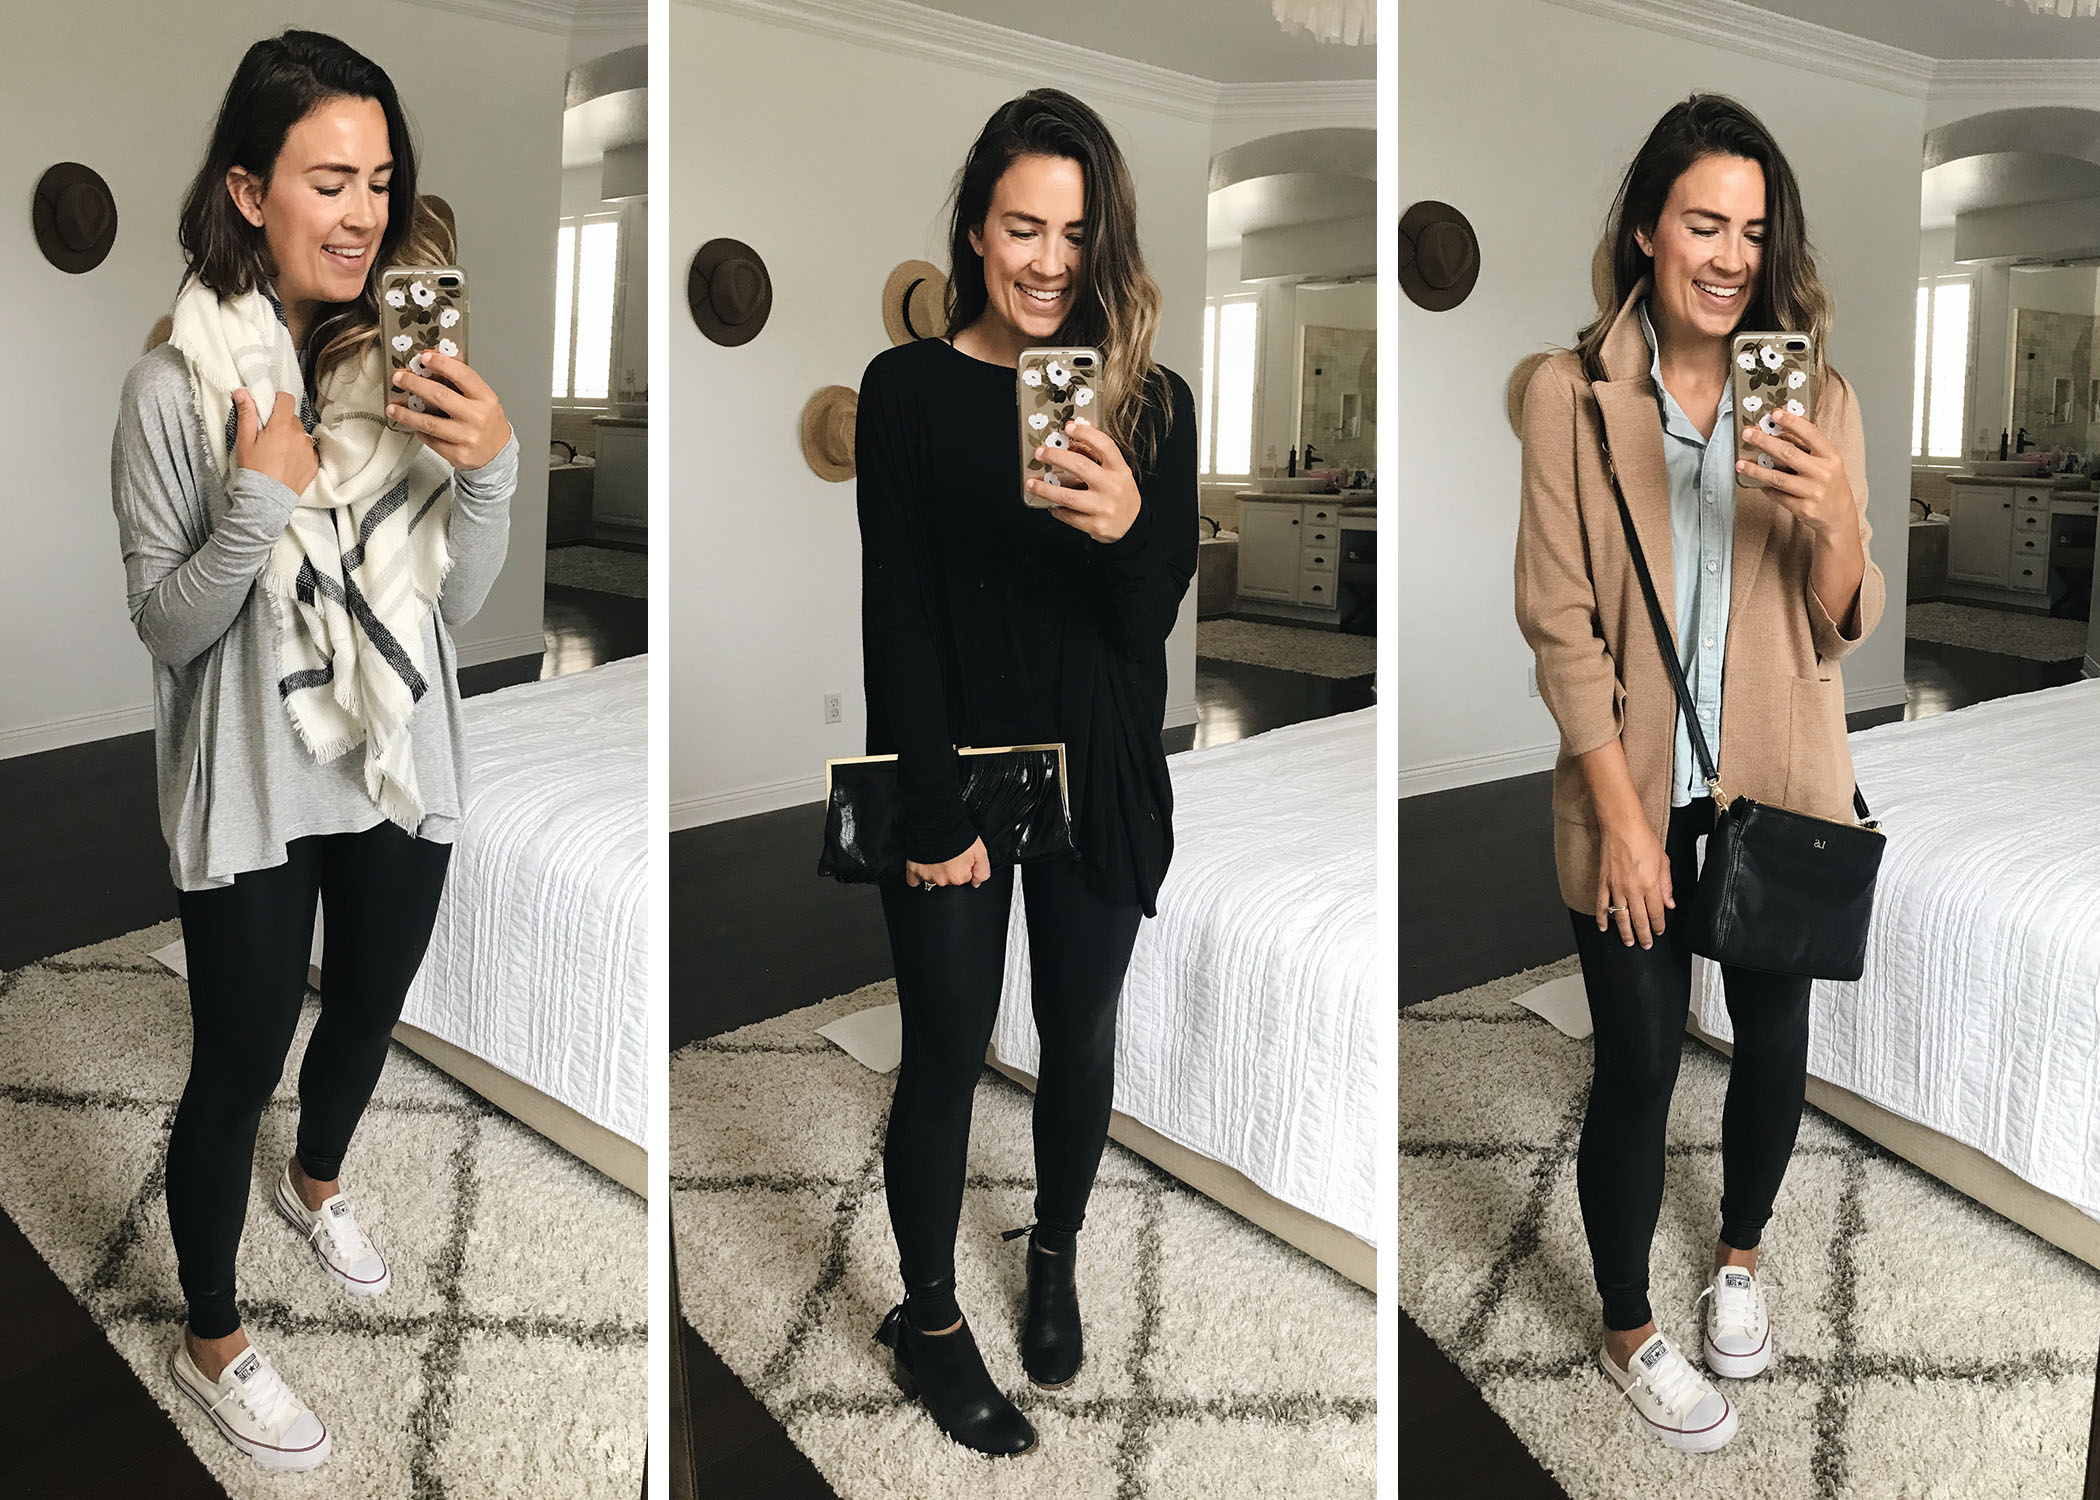 The Best Way to Wear Leather Leggings 